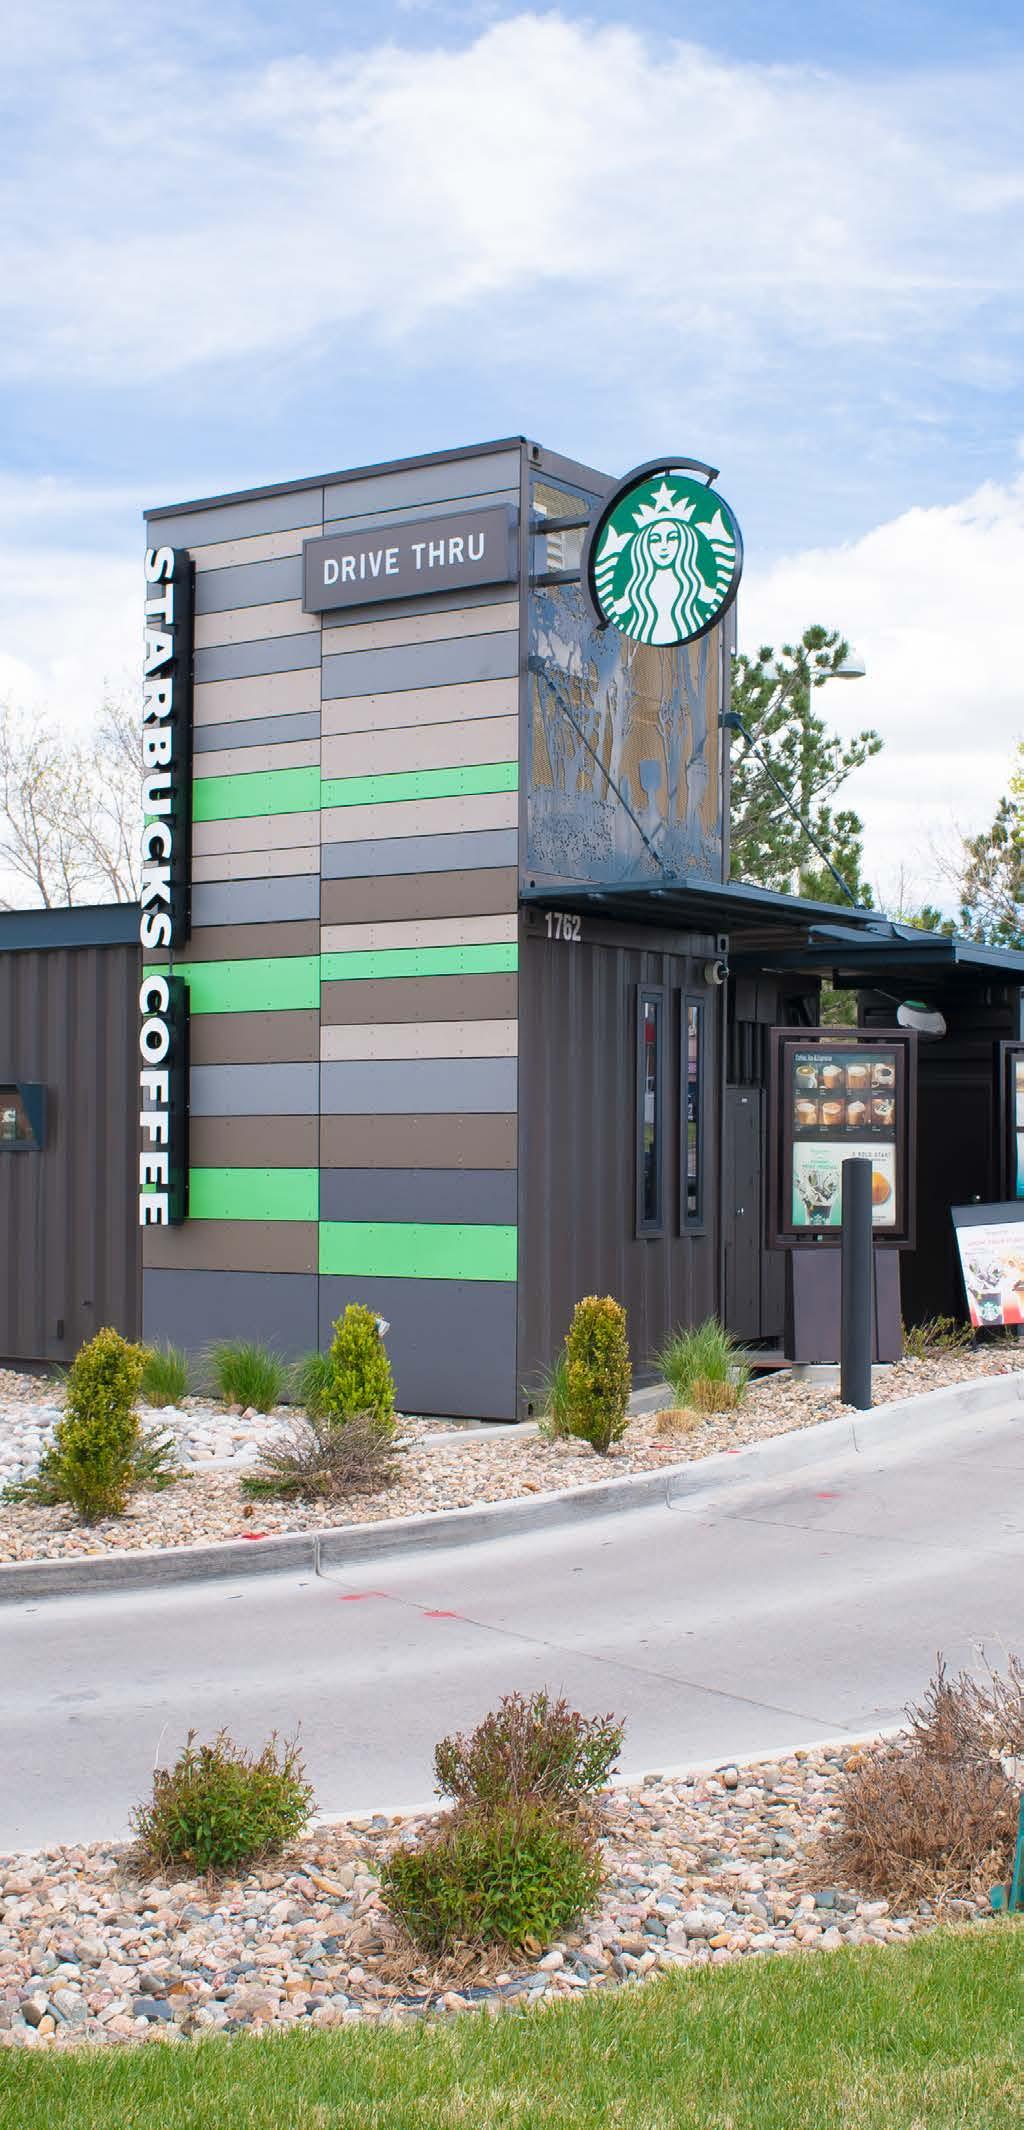 Investment Overview Marcus & Millichap is pleased to present this 380-square foot Starbuck s Reclamation Drive Thru in Colorado Springs, Colorado s second most populated city.